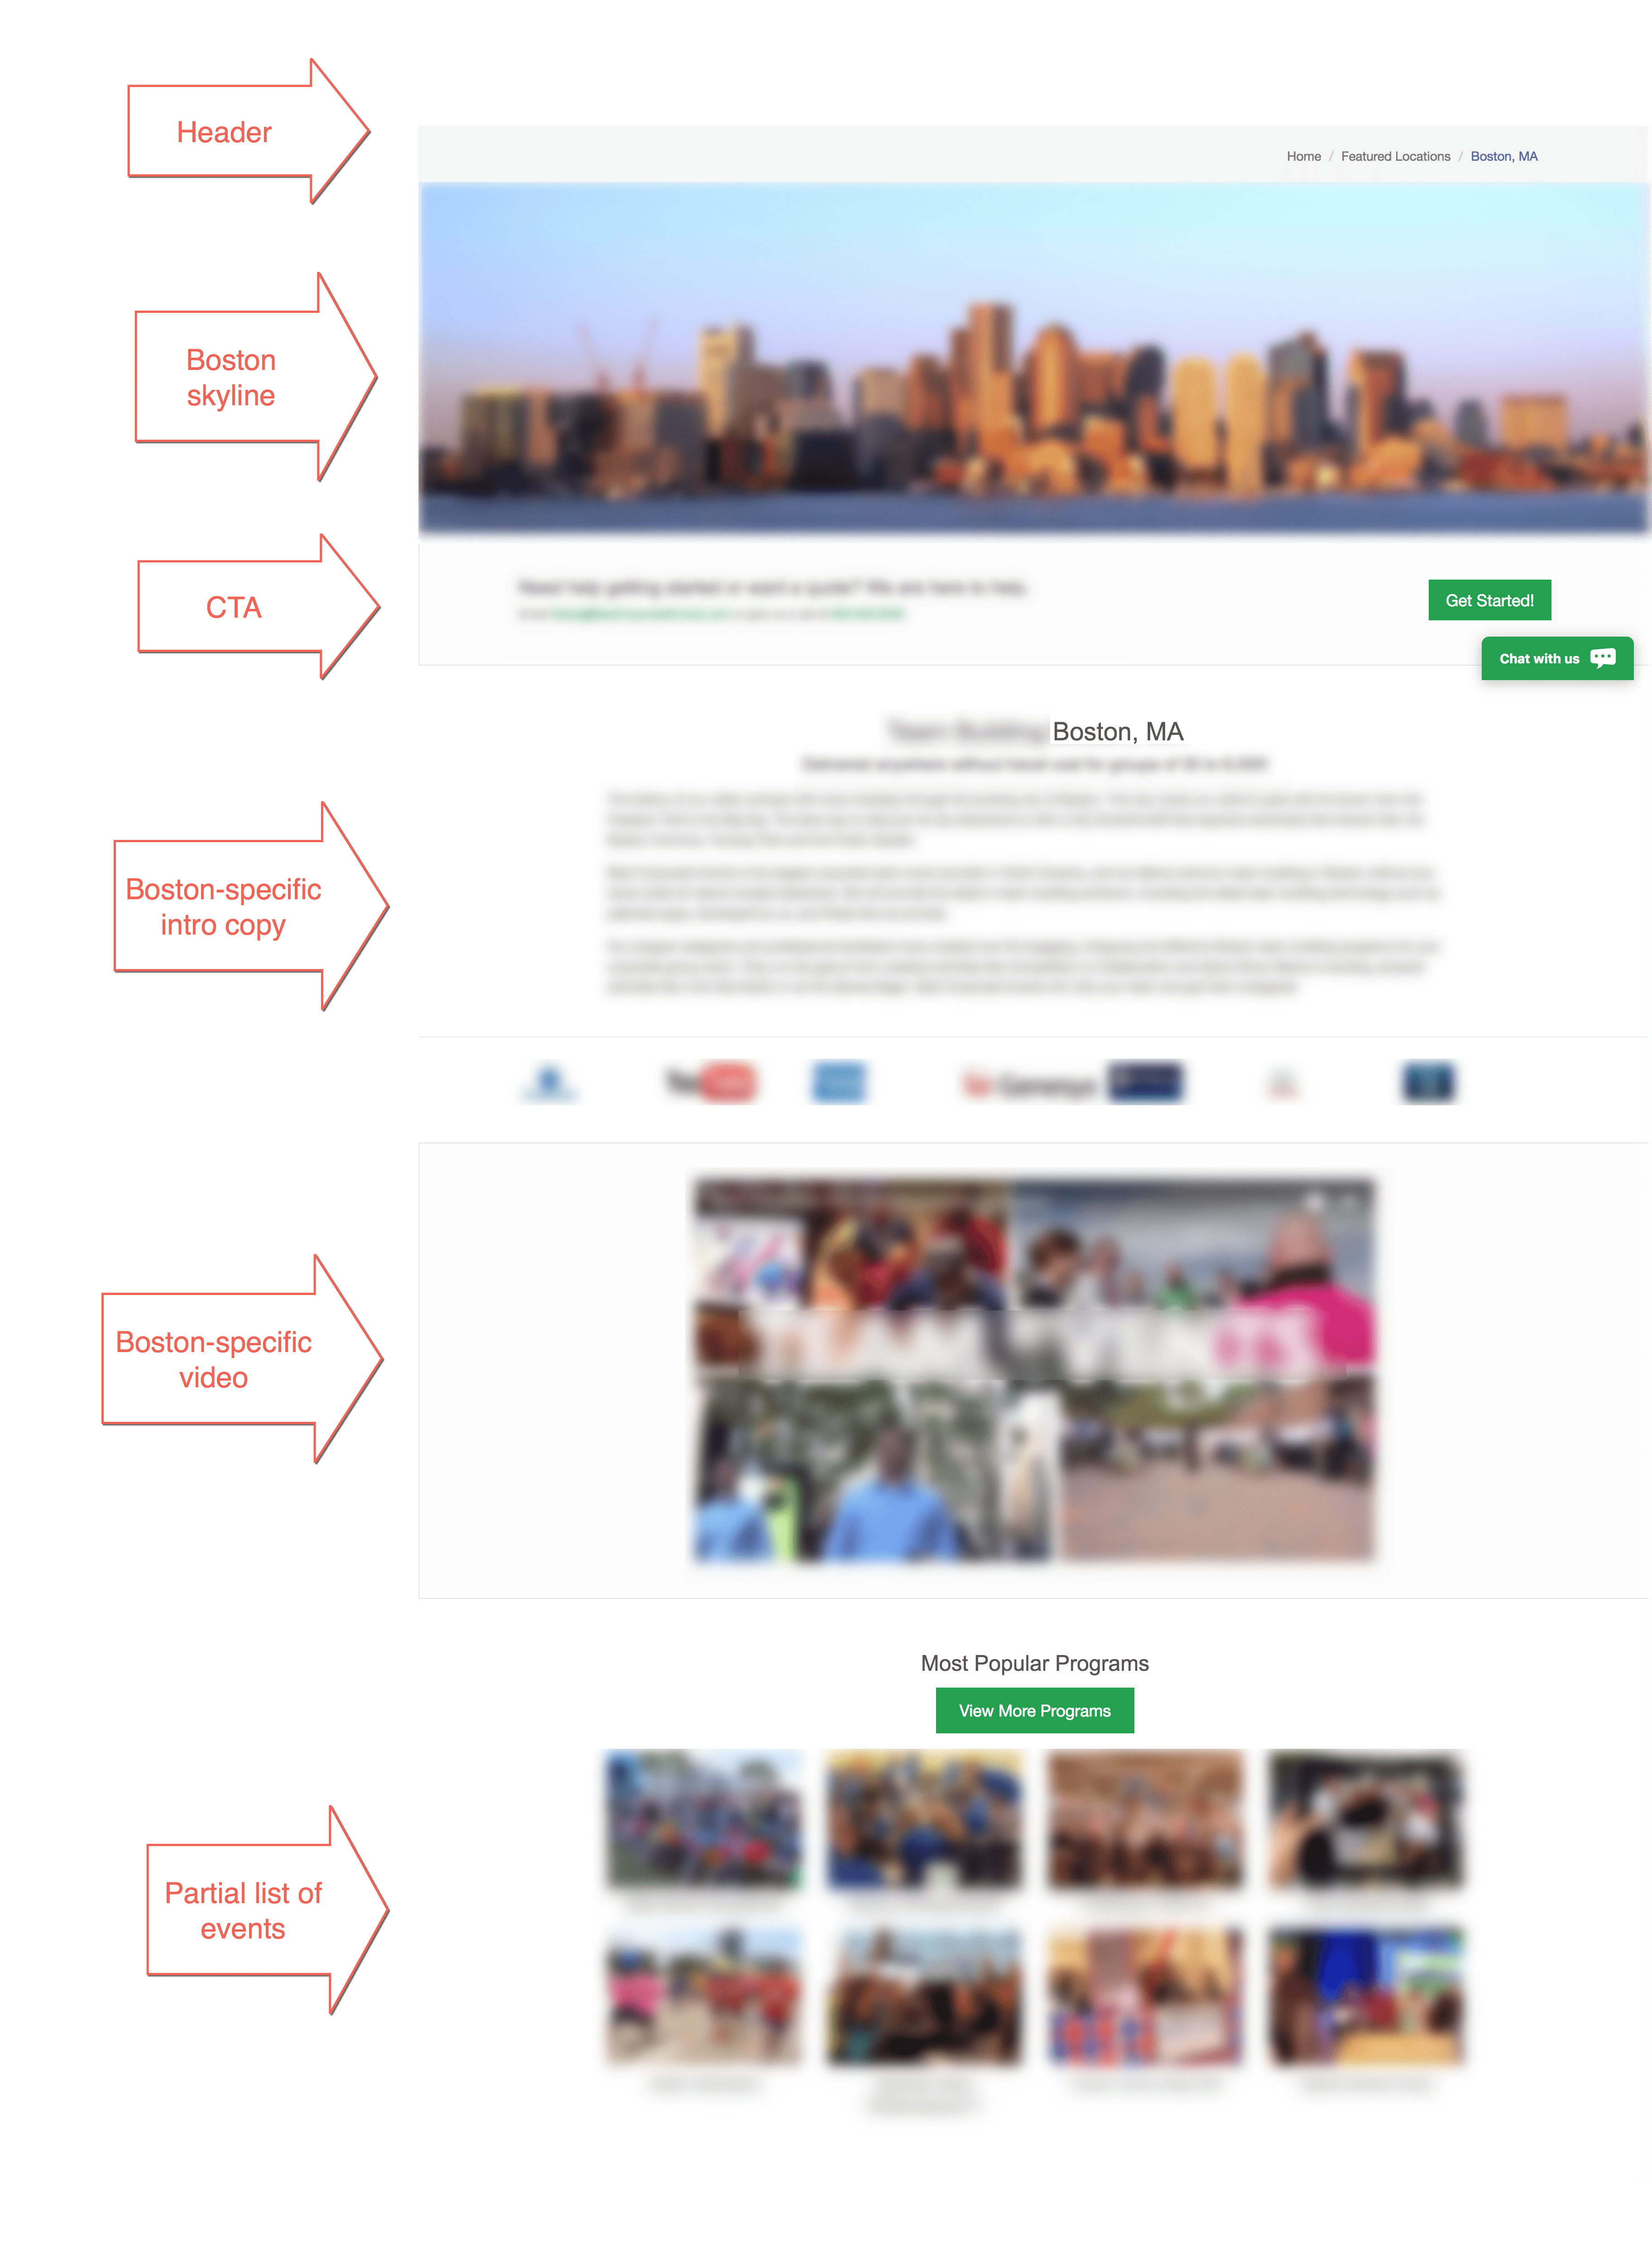 Landing page based on city